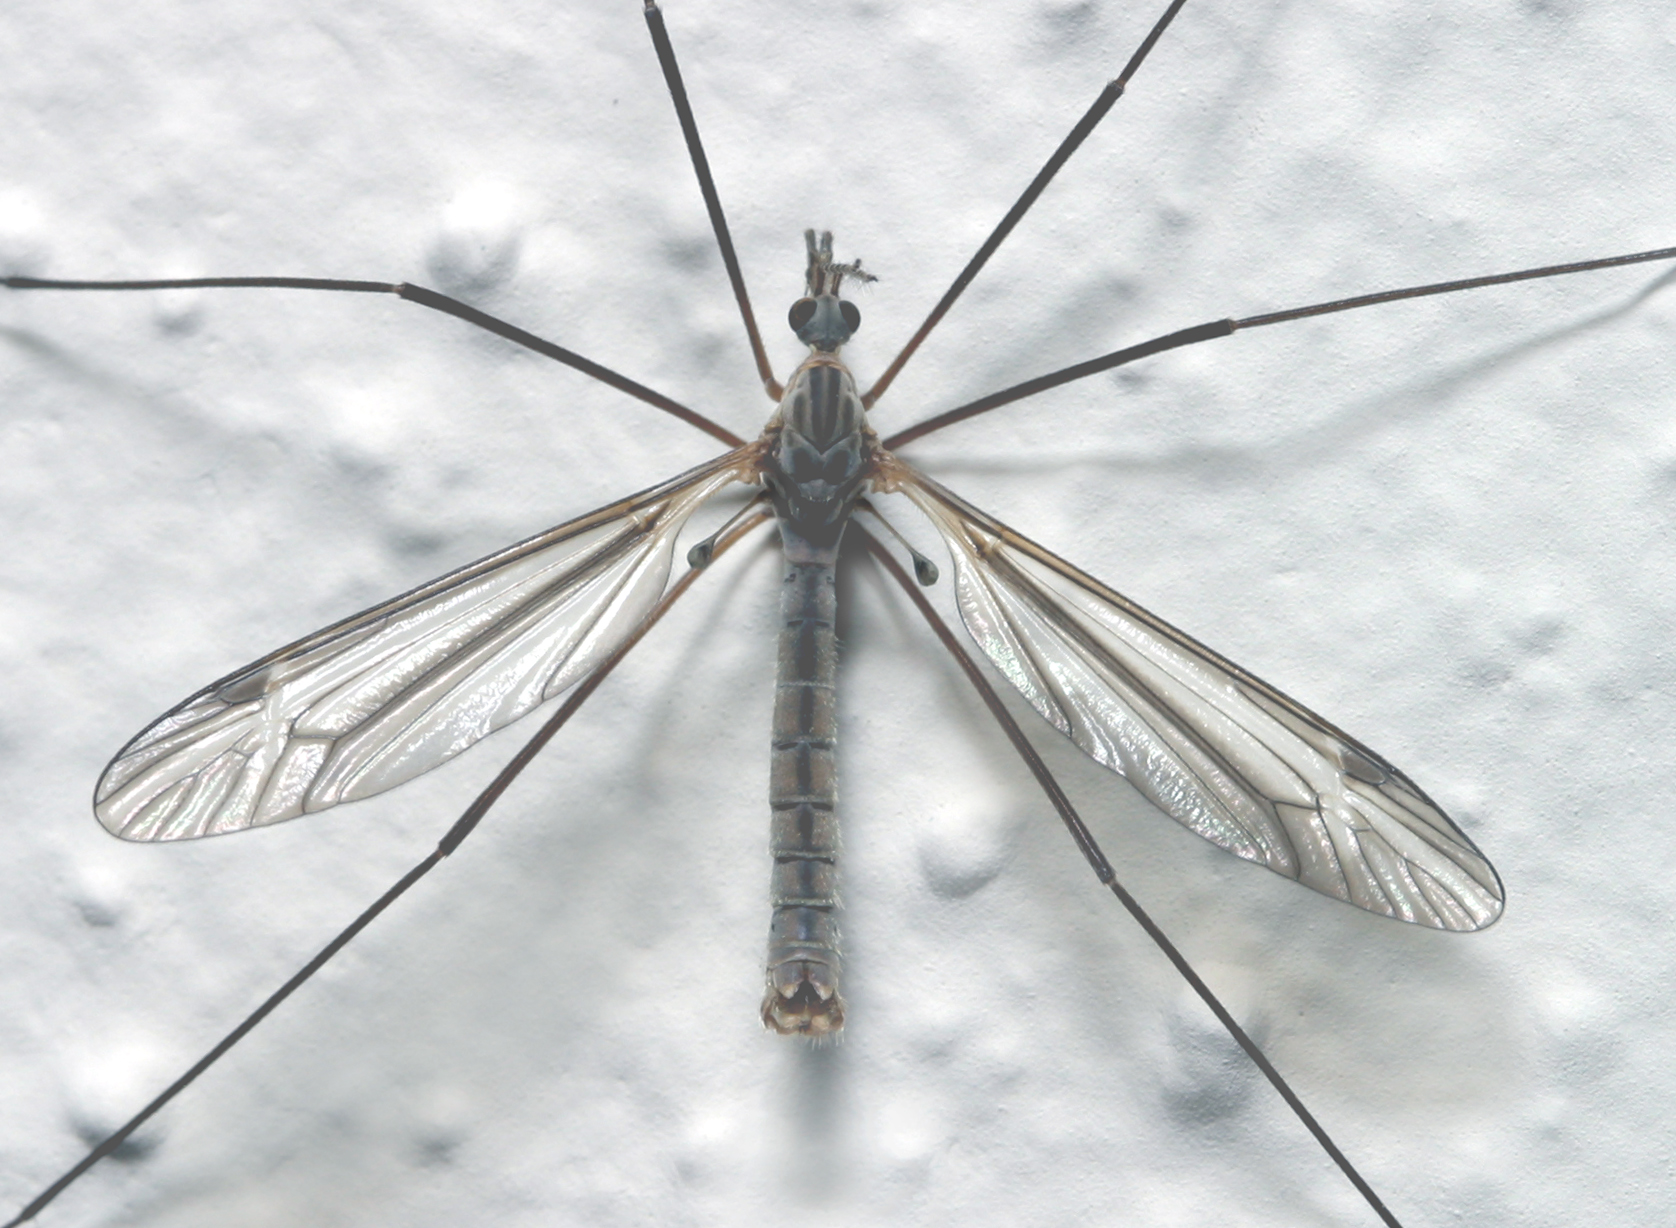 Crane flies, not mosquitoes - Insects in the City